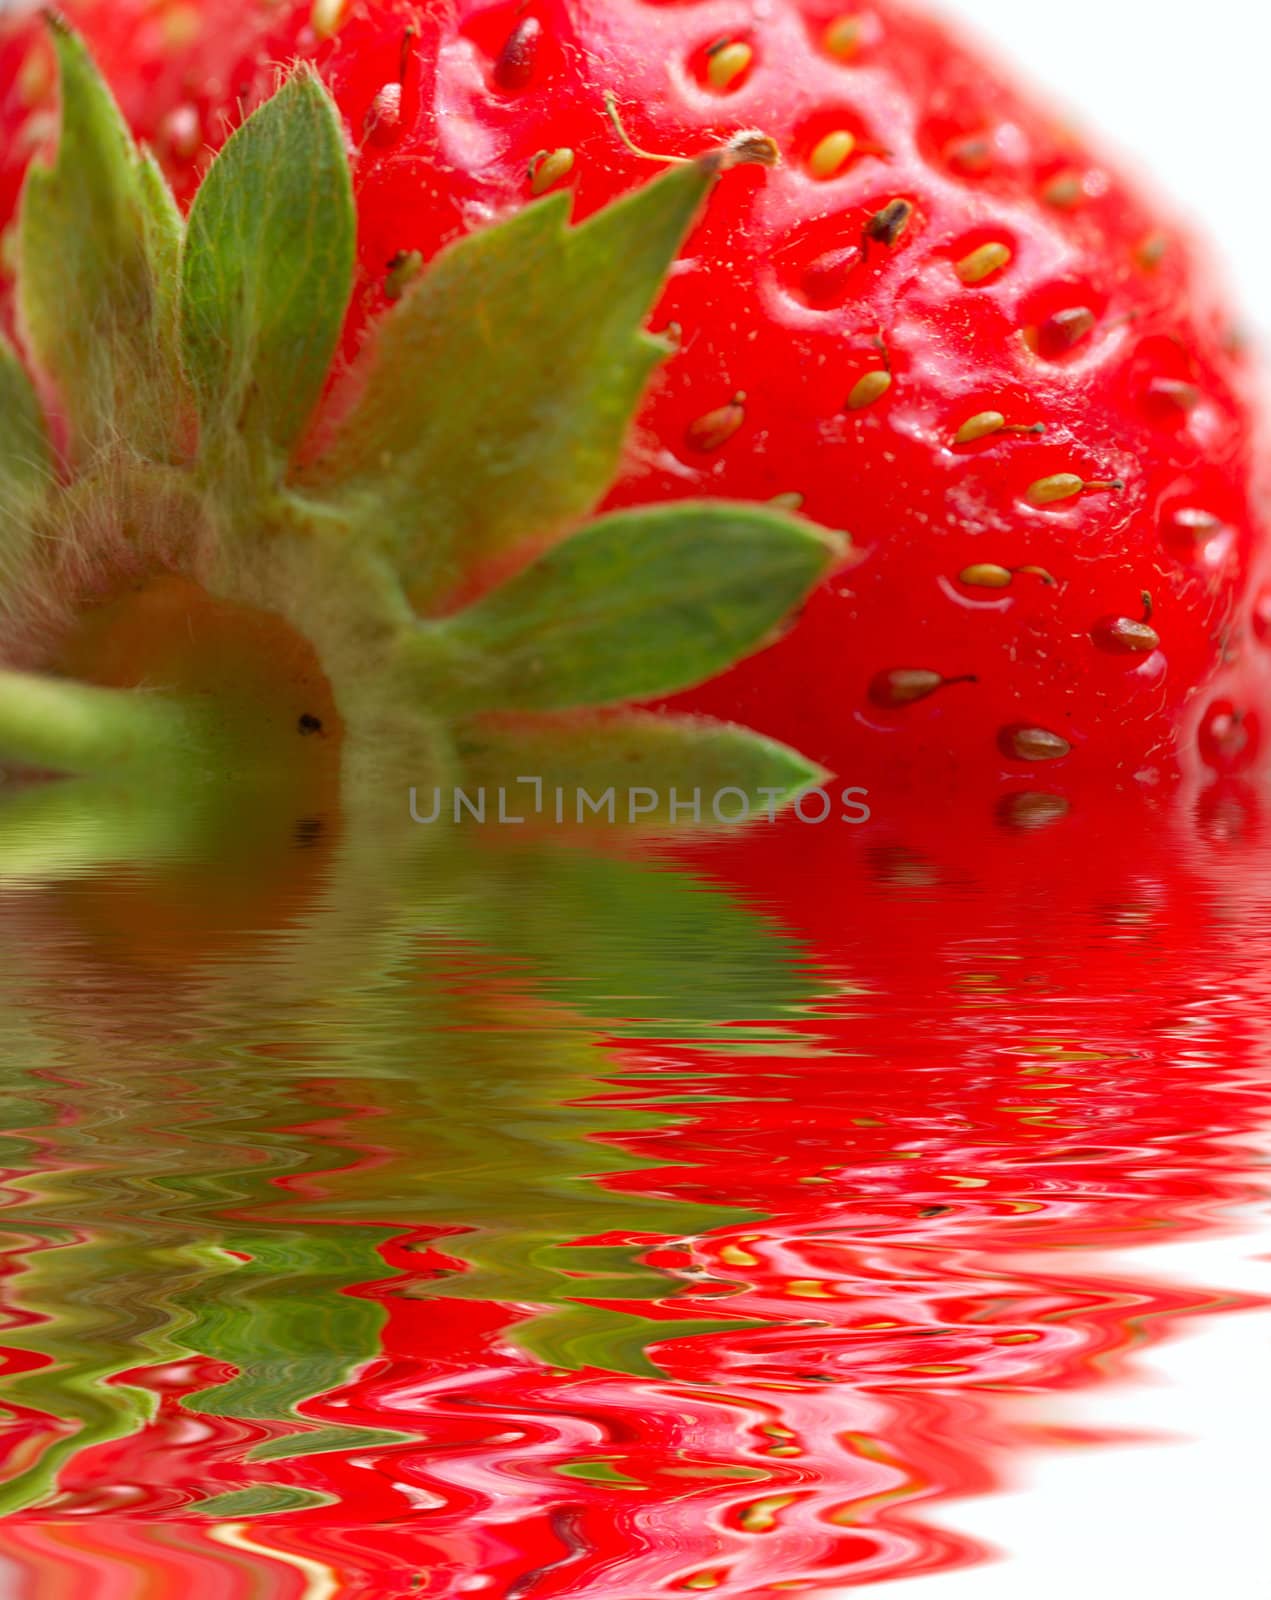 macro of strawberry with leaves